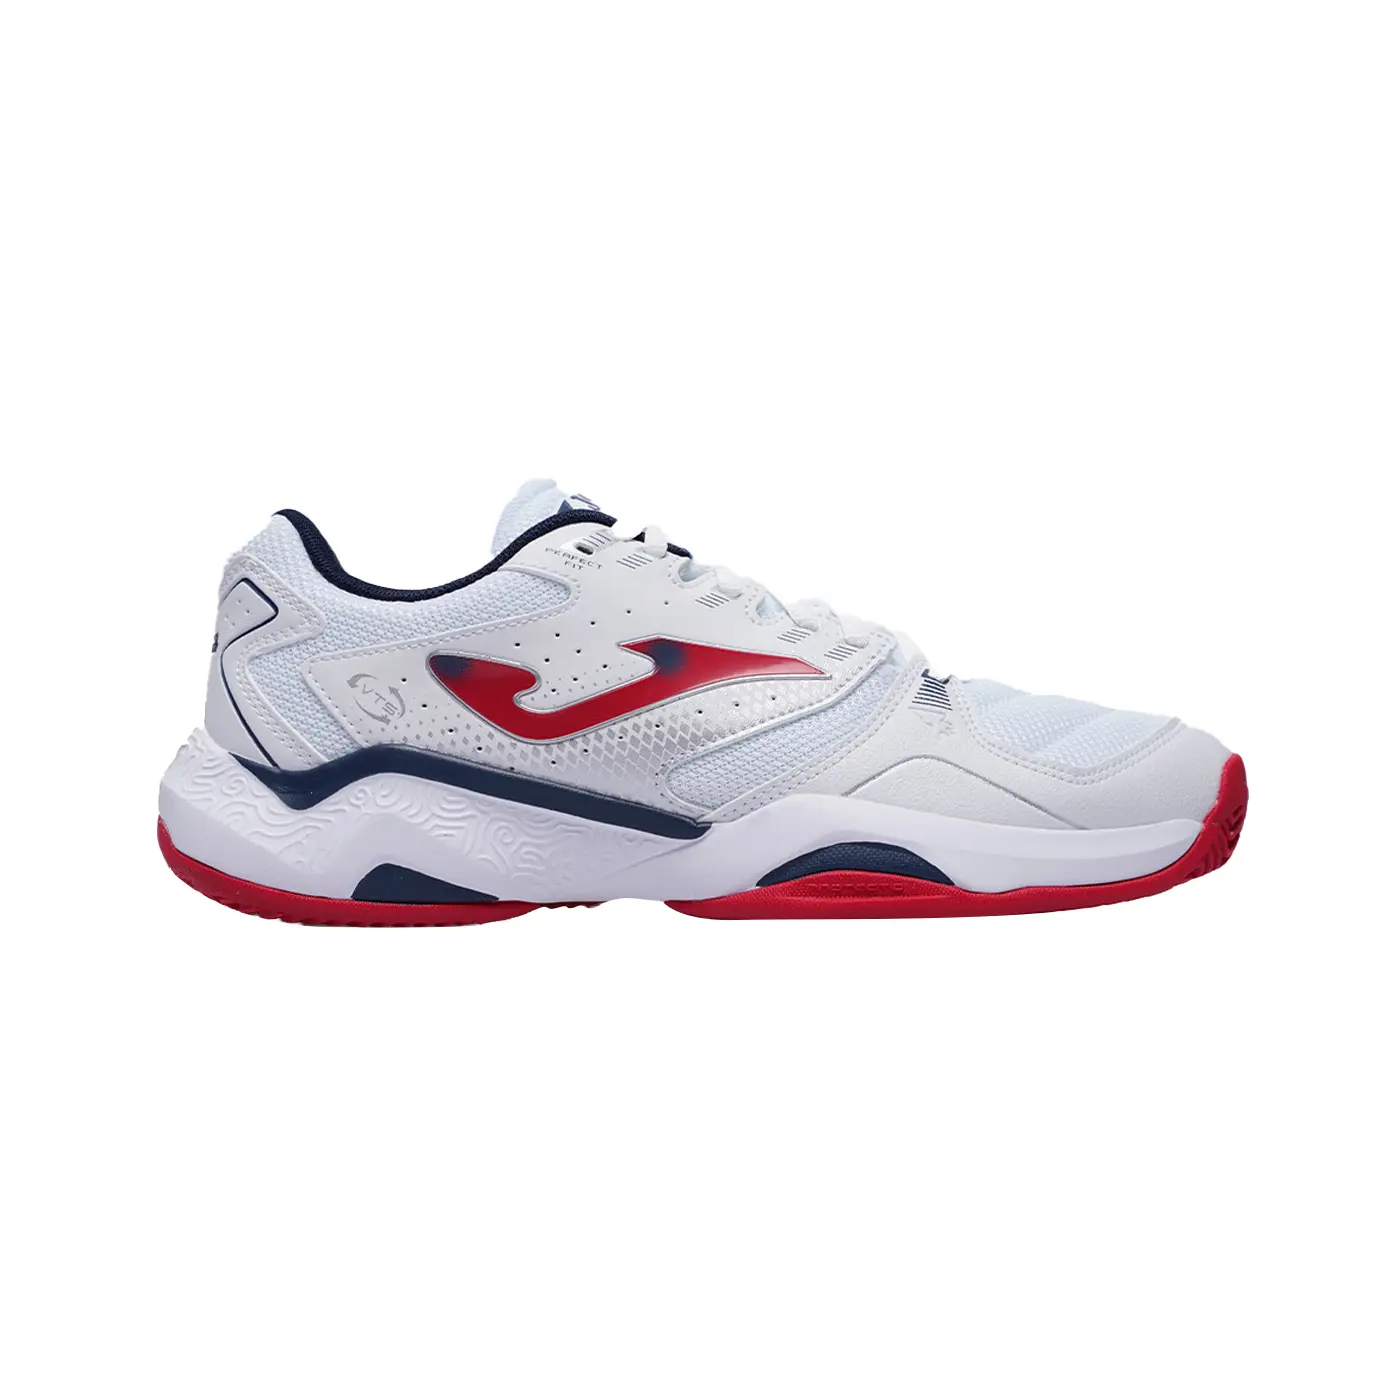 Joma Padel Shoes T.Master 1000 2352 White Red Padel Shoes for men Image 5